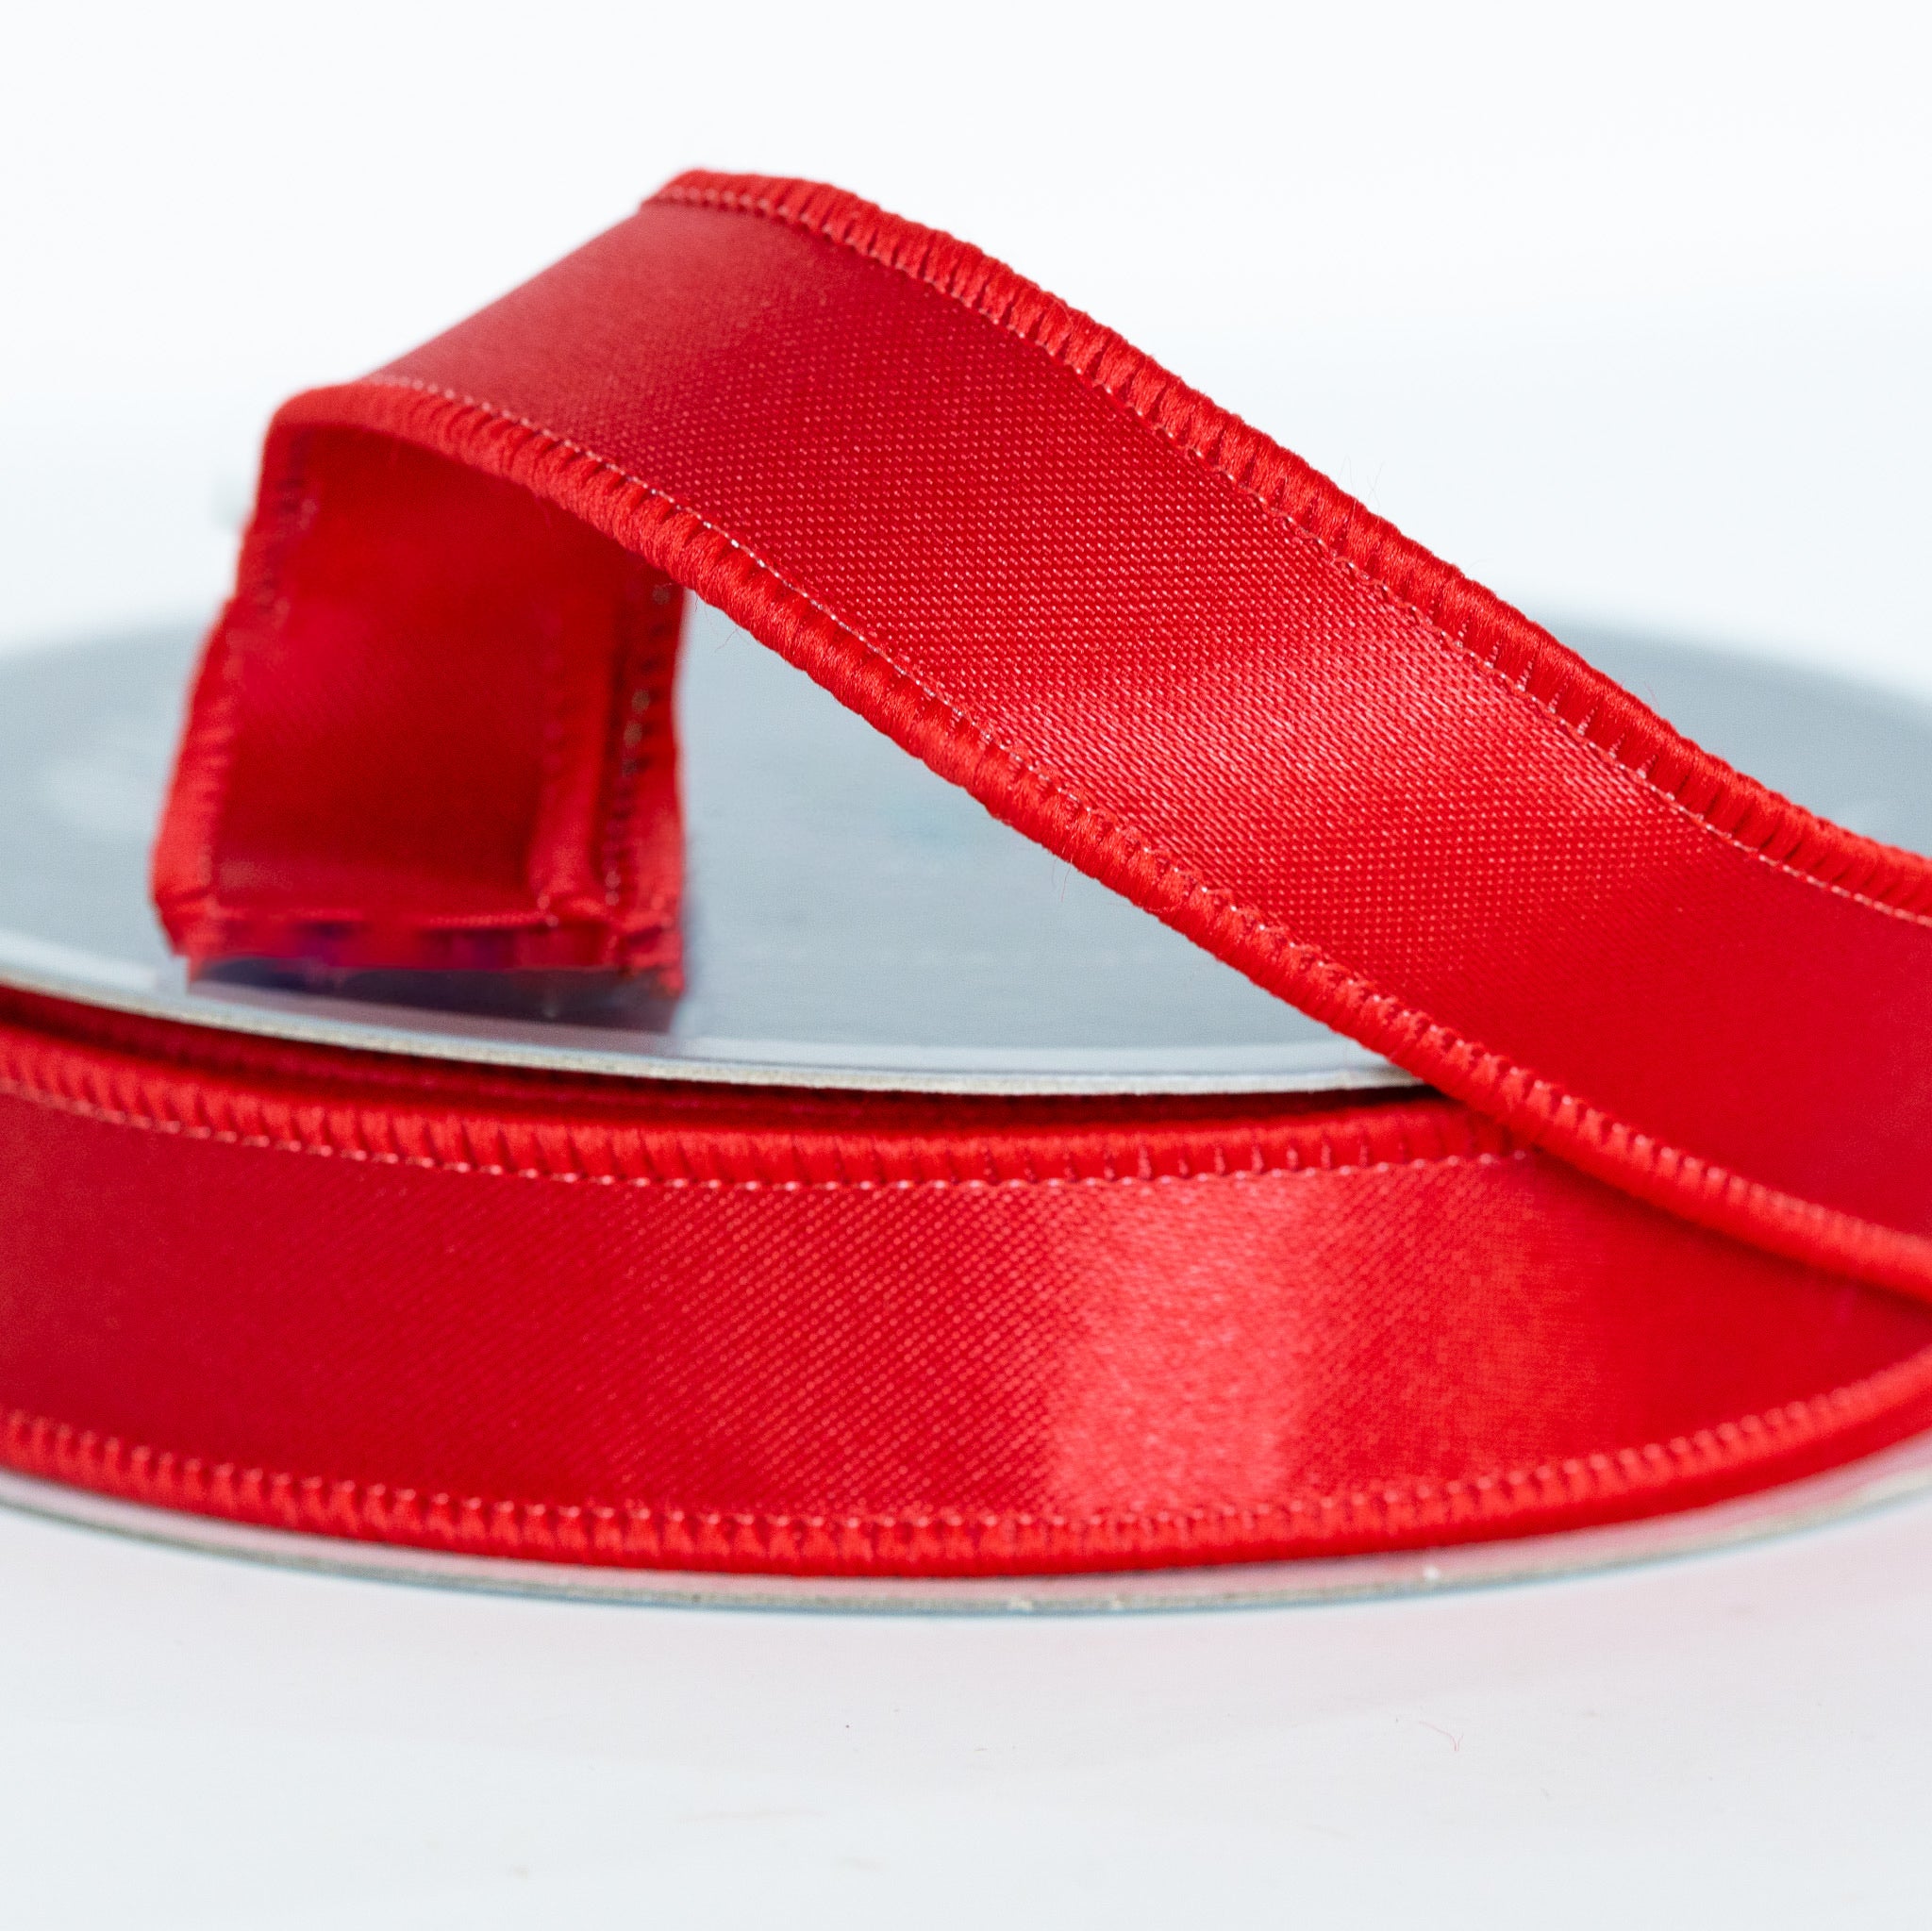 Satin Ribbon - Available in Two Colors and Sizes